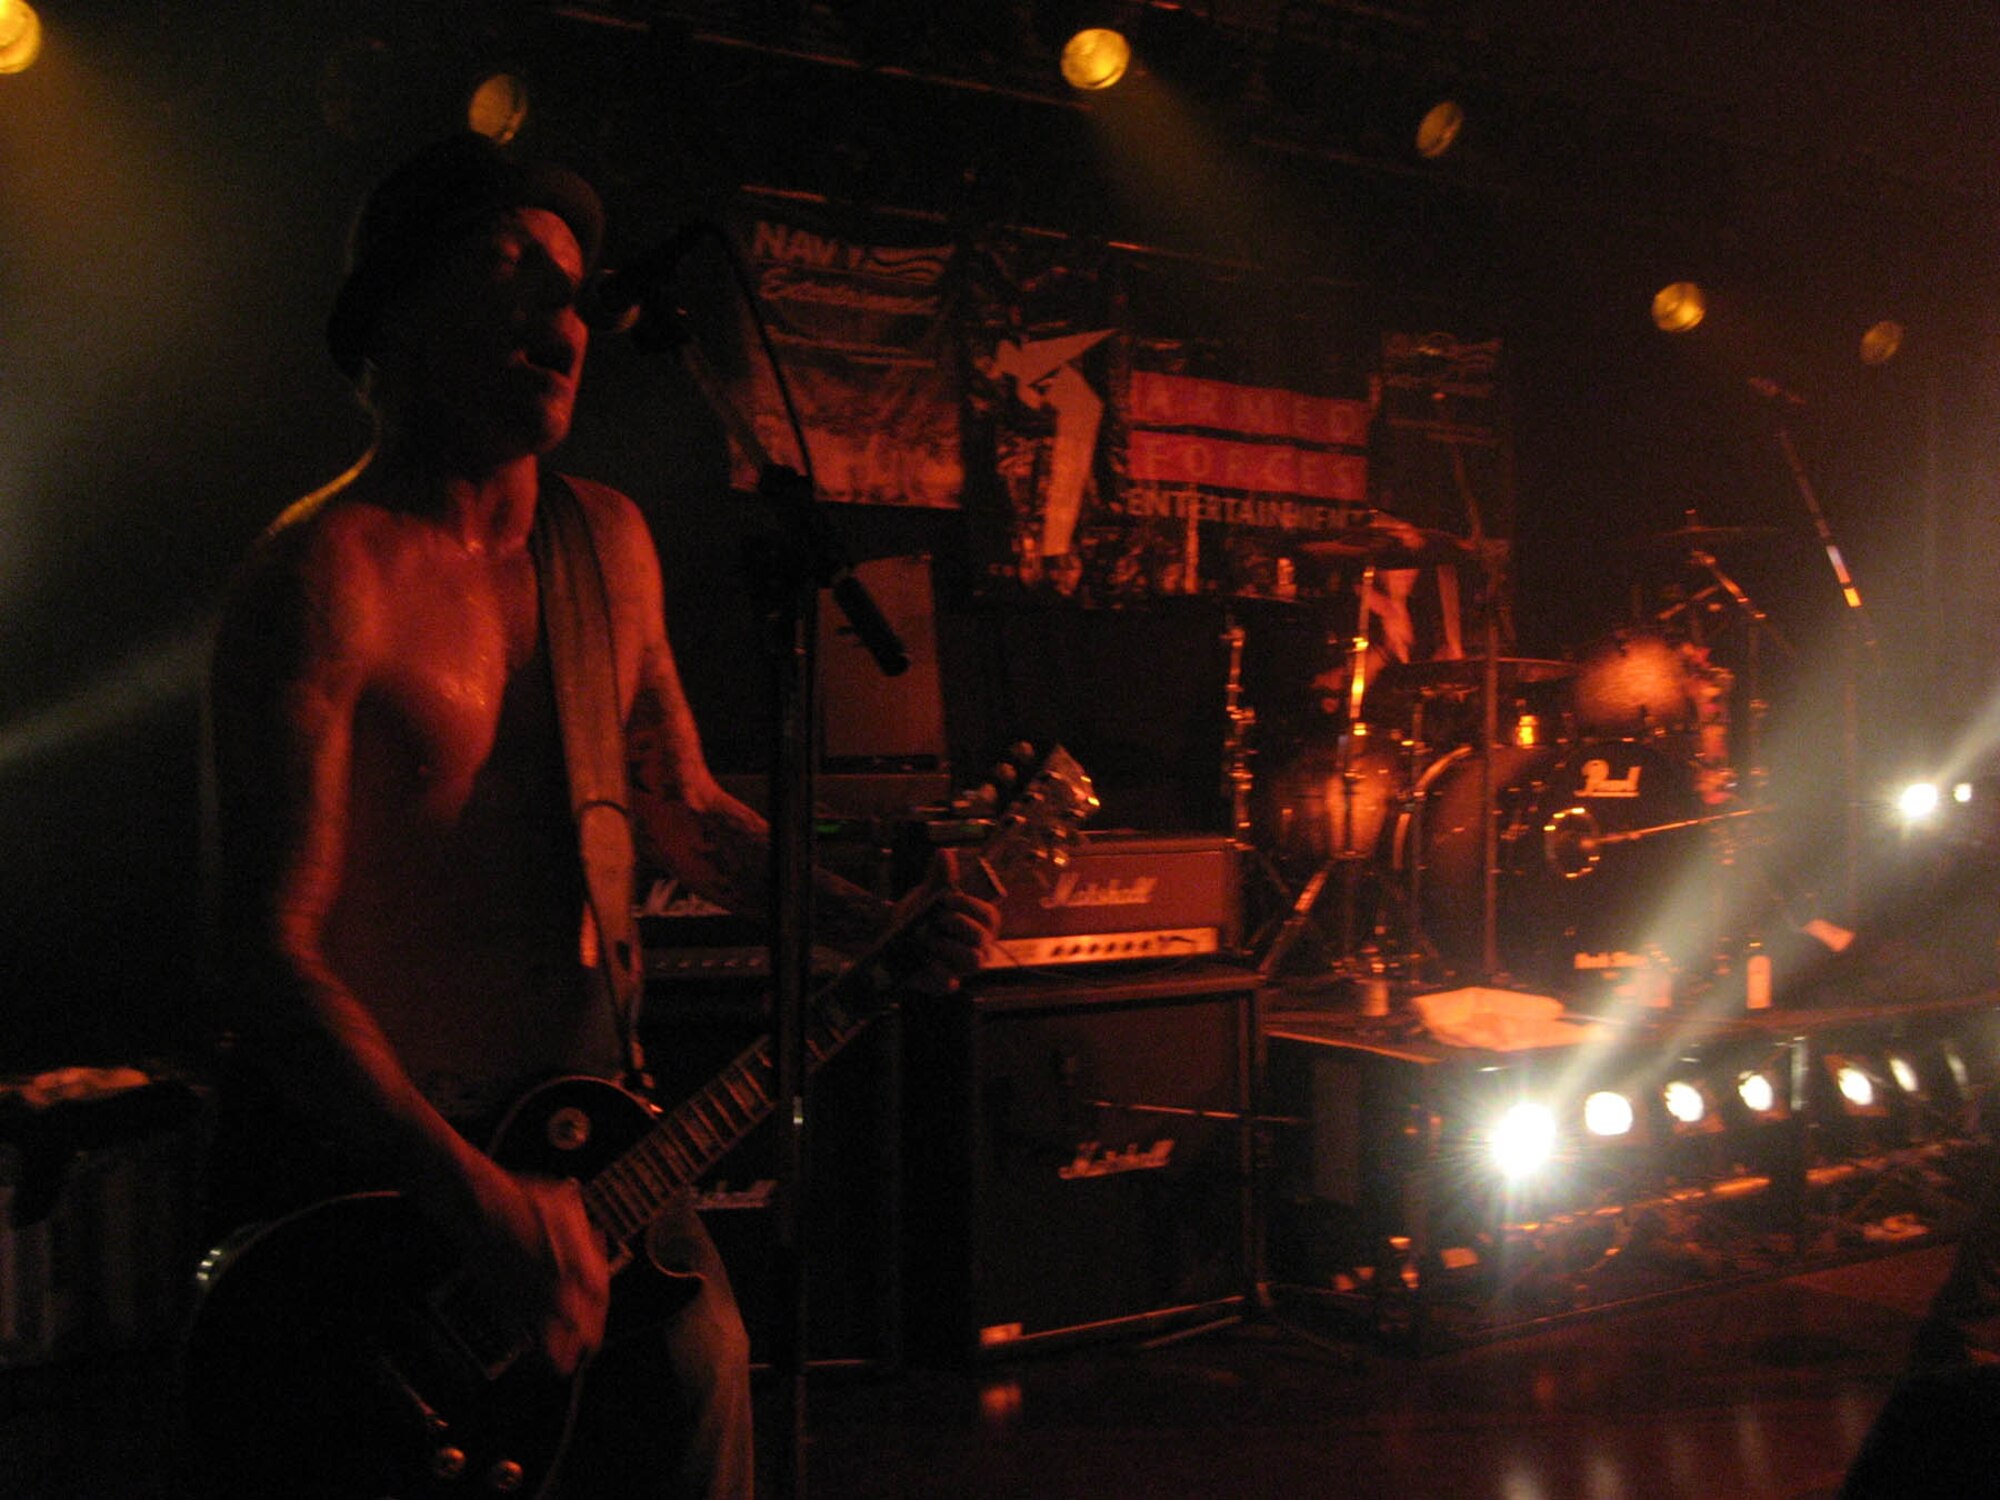 SPANGDAHLEM AIR BASE, Germany – (Left to right) Jeremy Popoff, Lit guitarist, jams at the 50th Annual Bitburg BASH June 30, 2007. All members of Lit an Orange County, California-based band best known for songs like “My Own Worst Enemy” and “Miserable.” (US Air Force photo/Staff Sgt. Andrea Knudson) 